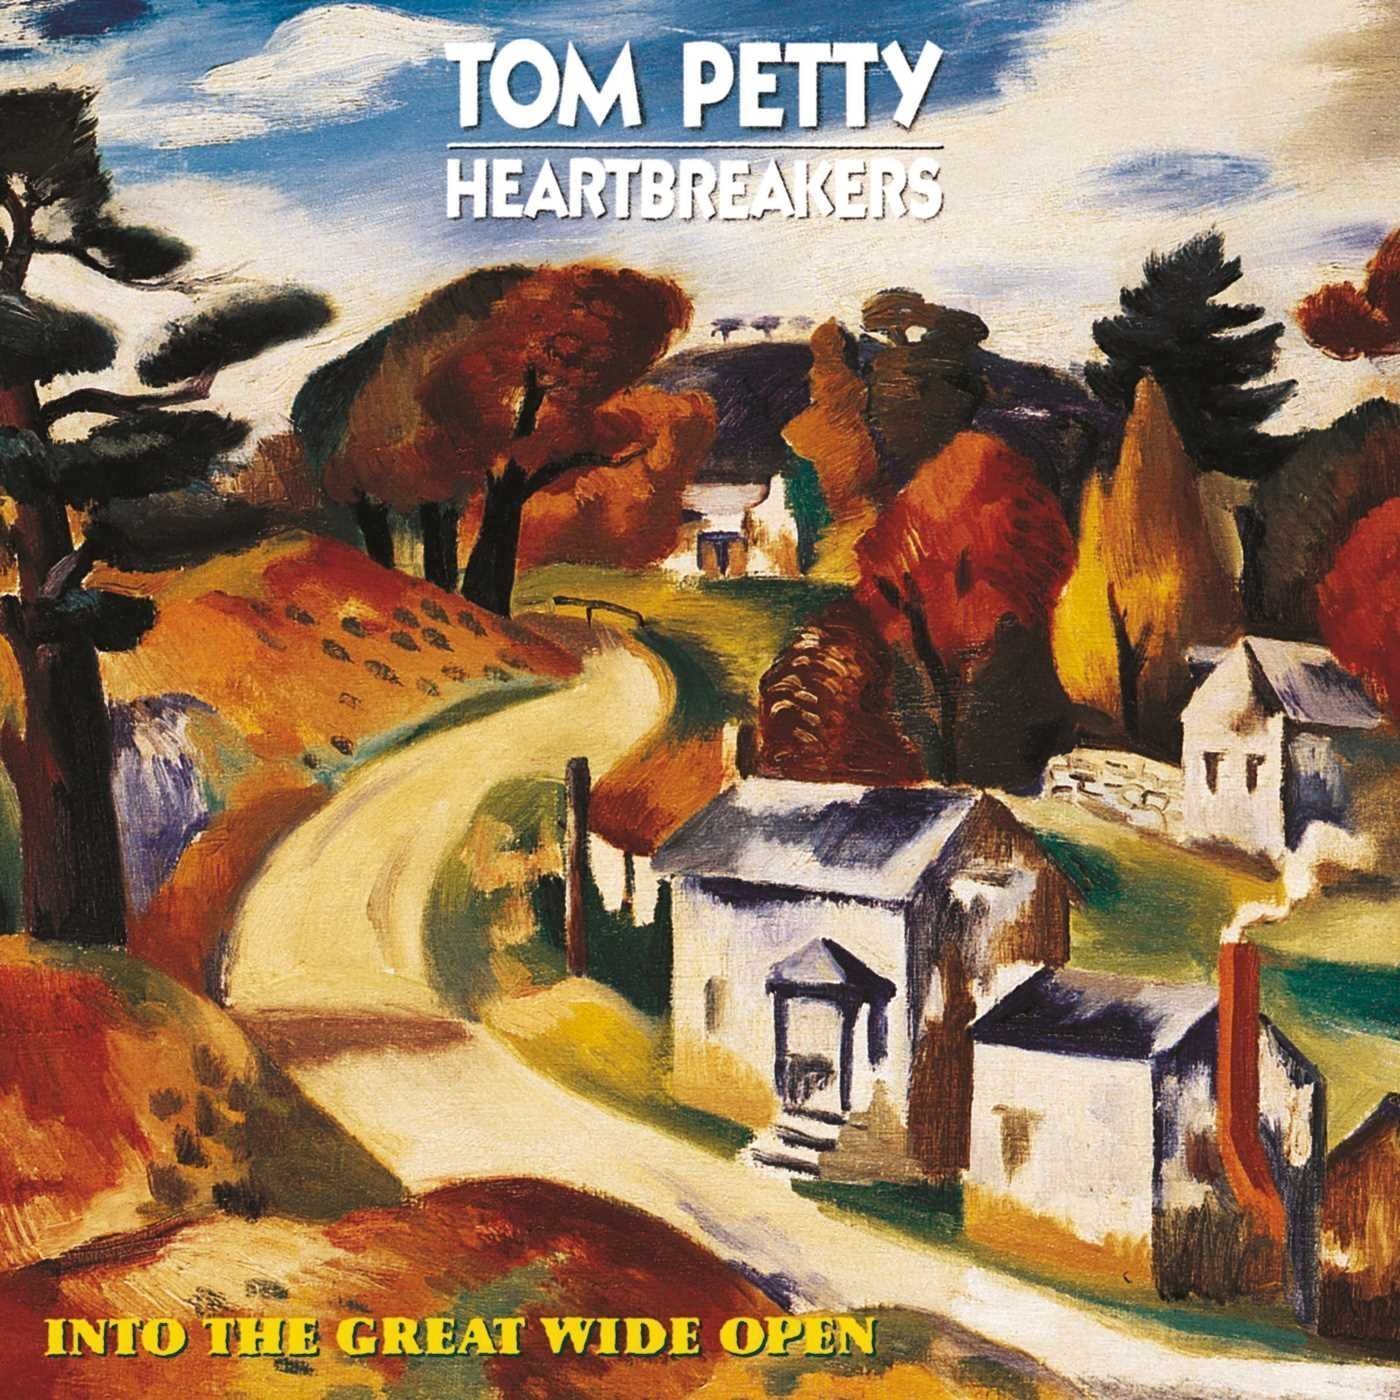 Vinyl Record Tom Petty - Into The Great Wide Open (LP)